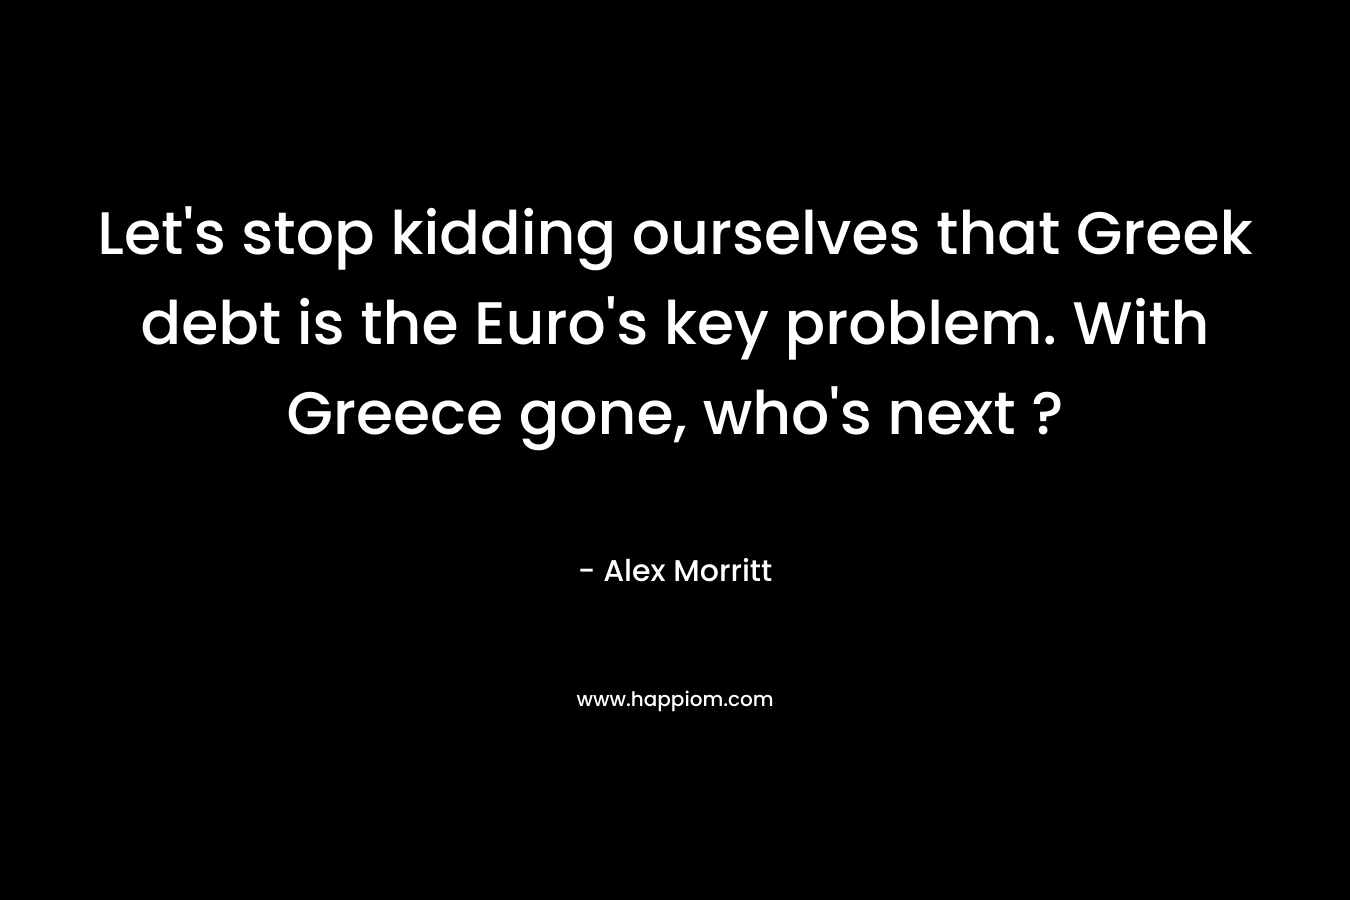 Let's stop kidding ourselves that Greek debt is the Euro's key problem. With Greece gone, who's next ?